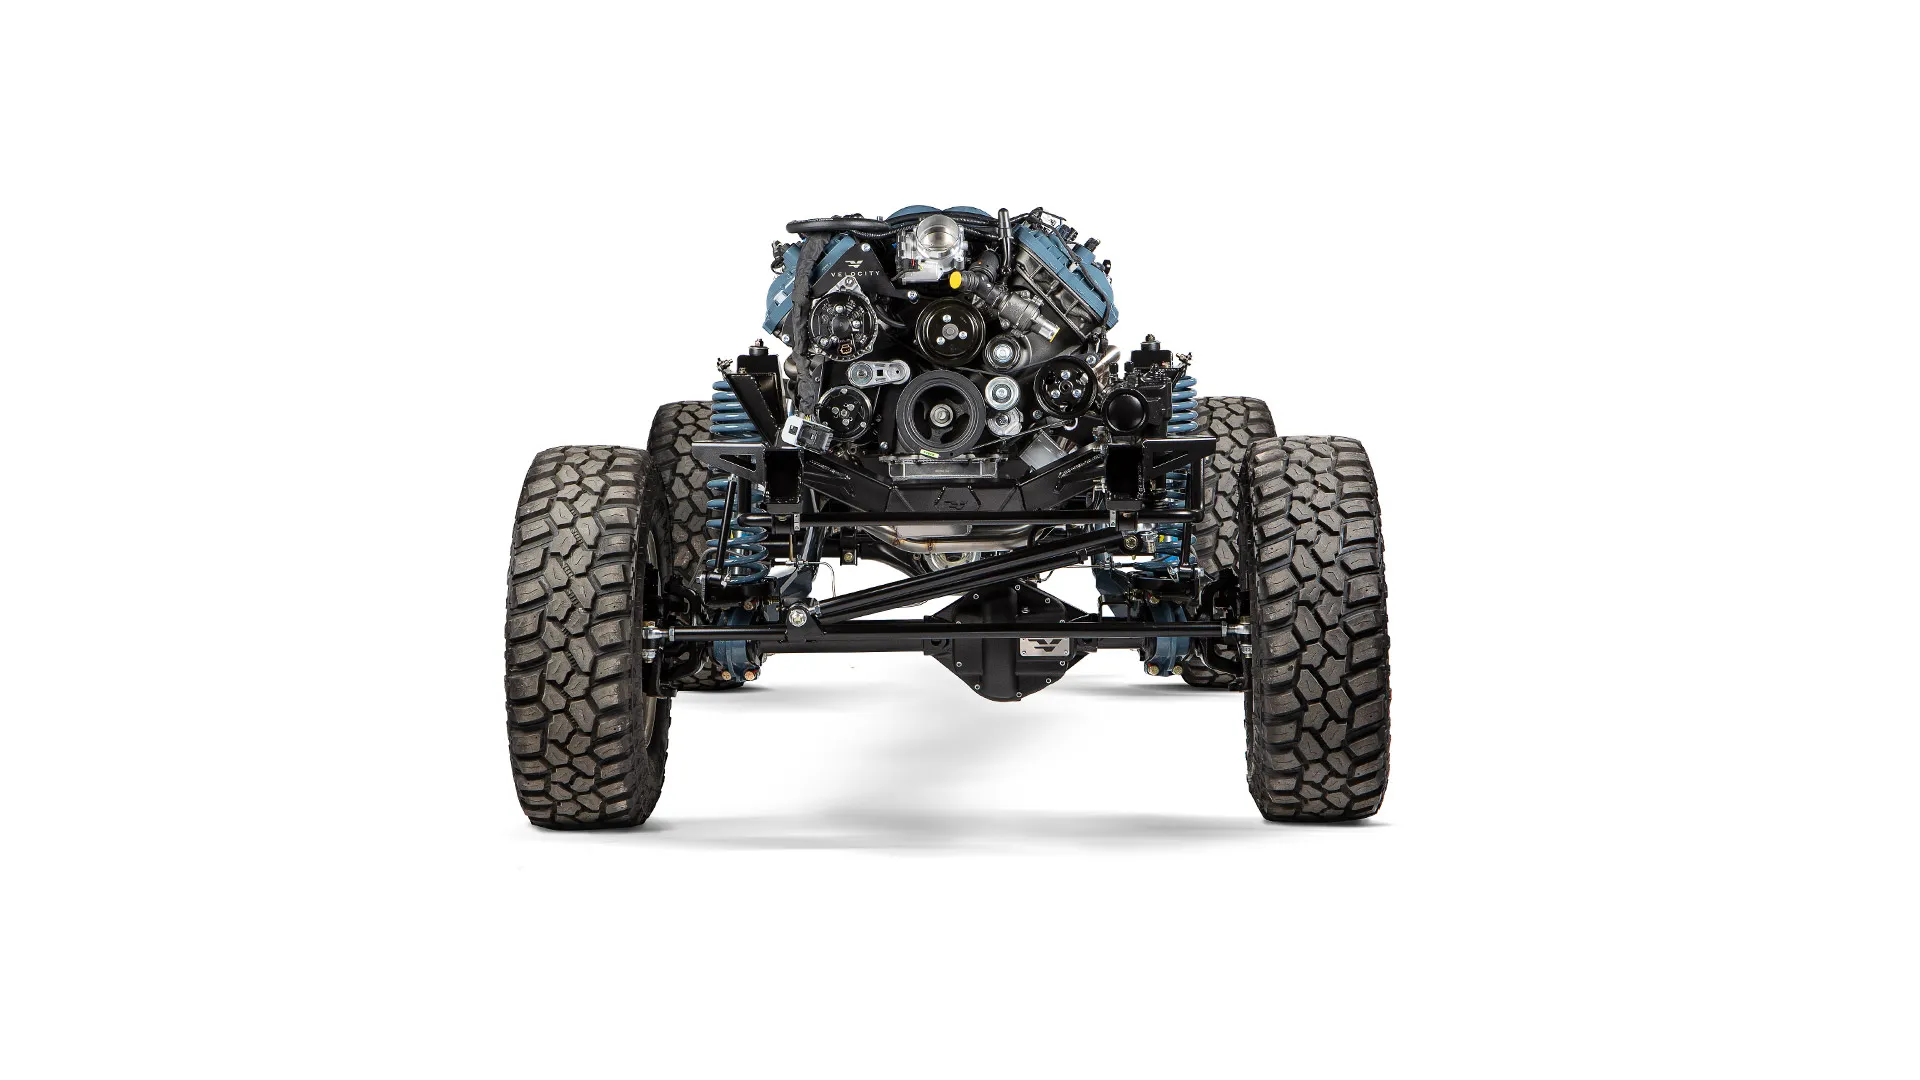 Classic Ford Bronco Velocity VB3 Rolling Chassis & Powertrain